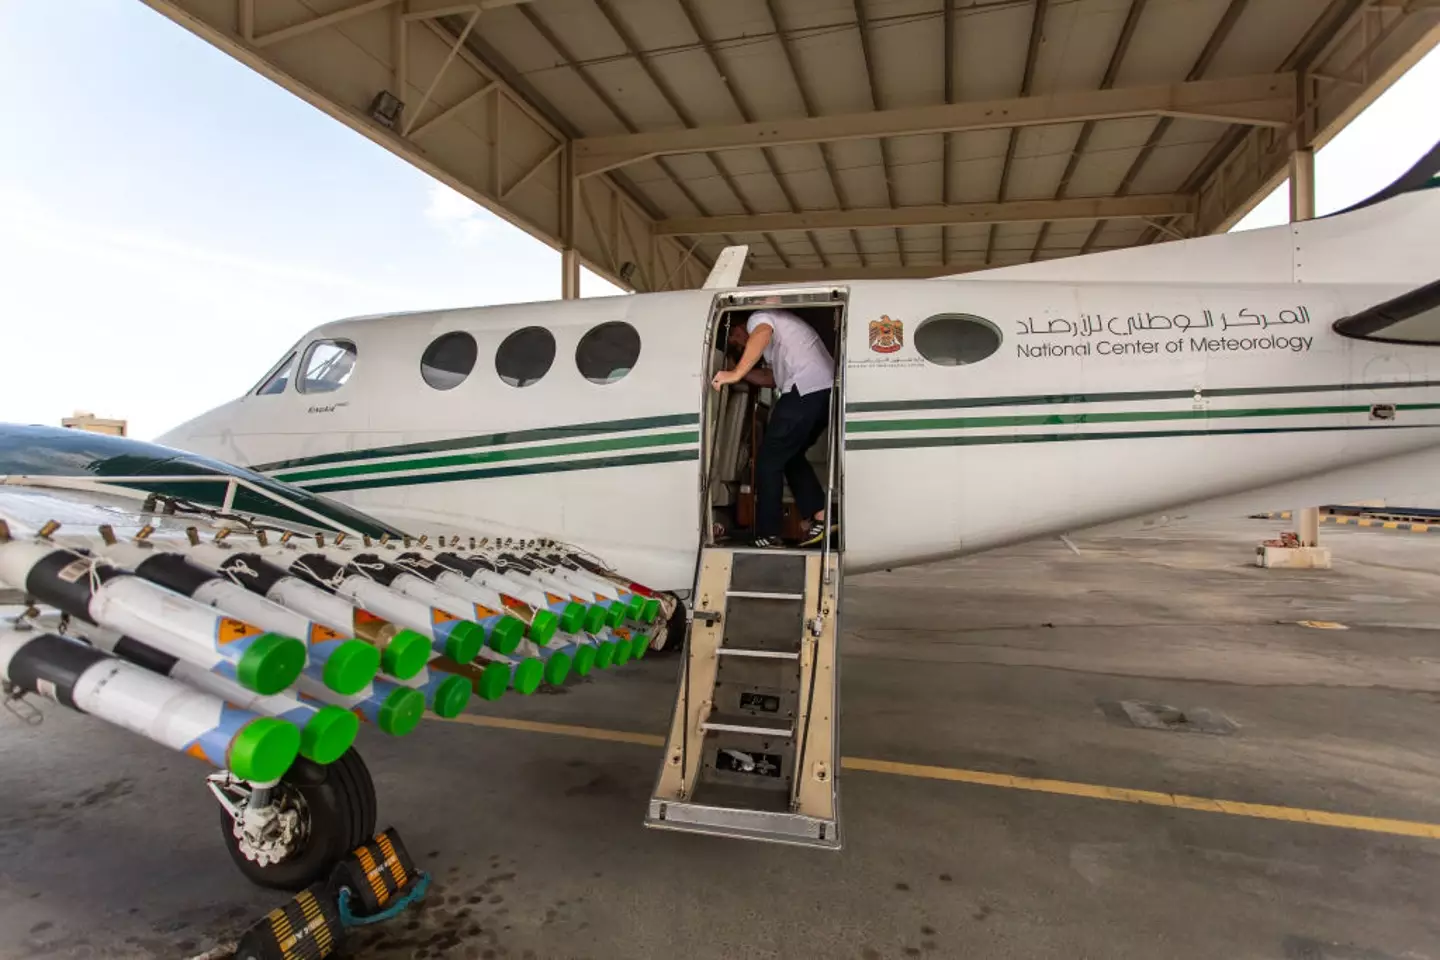 One of the planes used in the UAE's cloud-seeding operations. Andrea DiCenzo/Getty Images